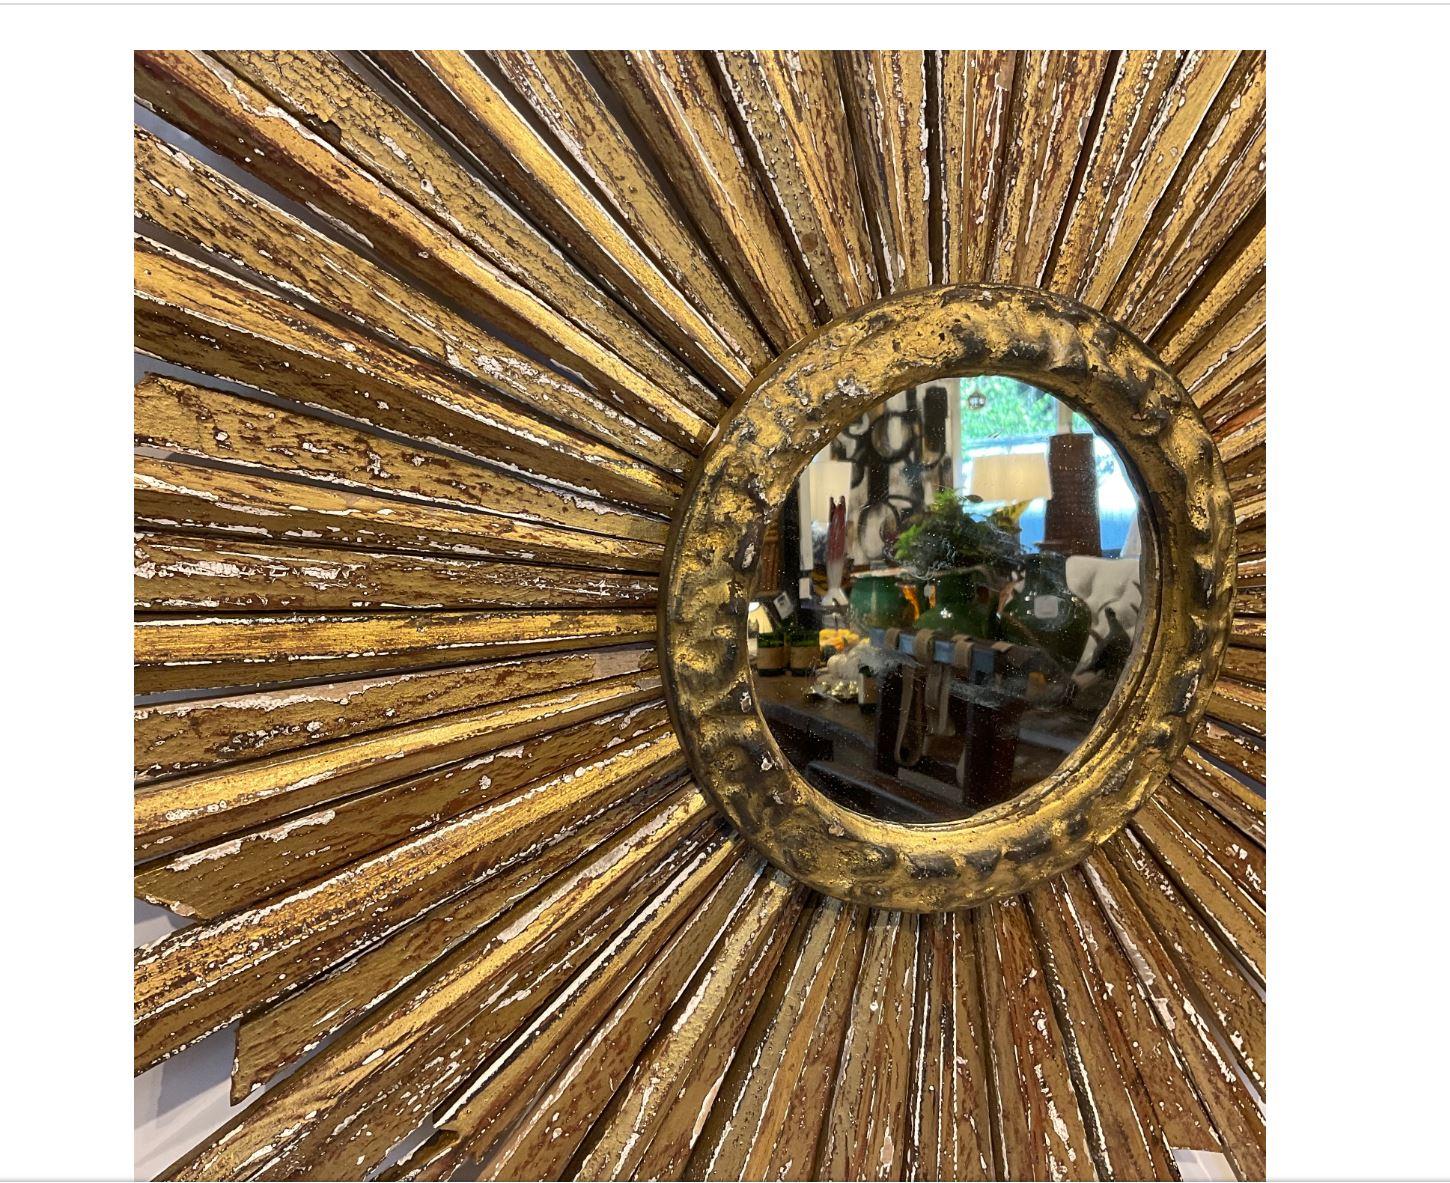 Beautiful Italian 19th century vintage sunburst mirror! This is a stunning piece with wooden rays that are hand carved and gilded in gold with beautiful detail on the edges. This would make a wonderful showstopping addition to any home!